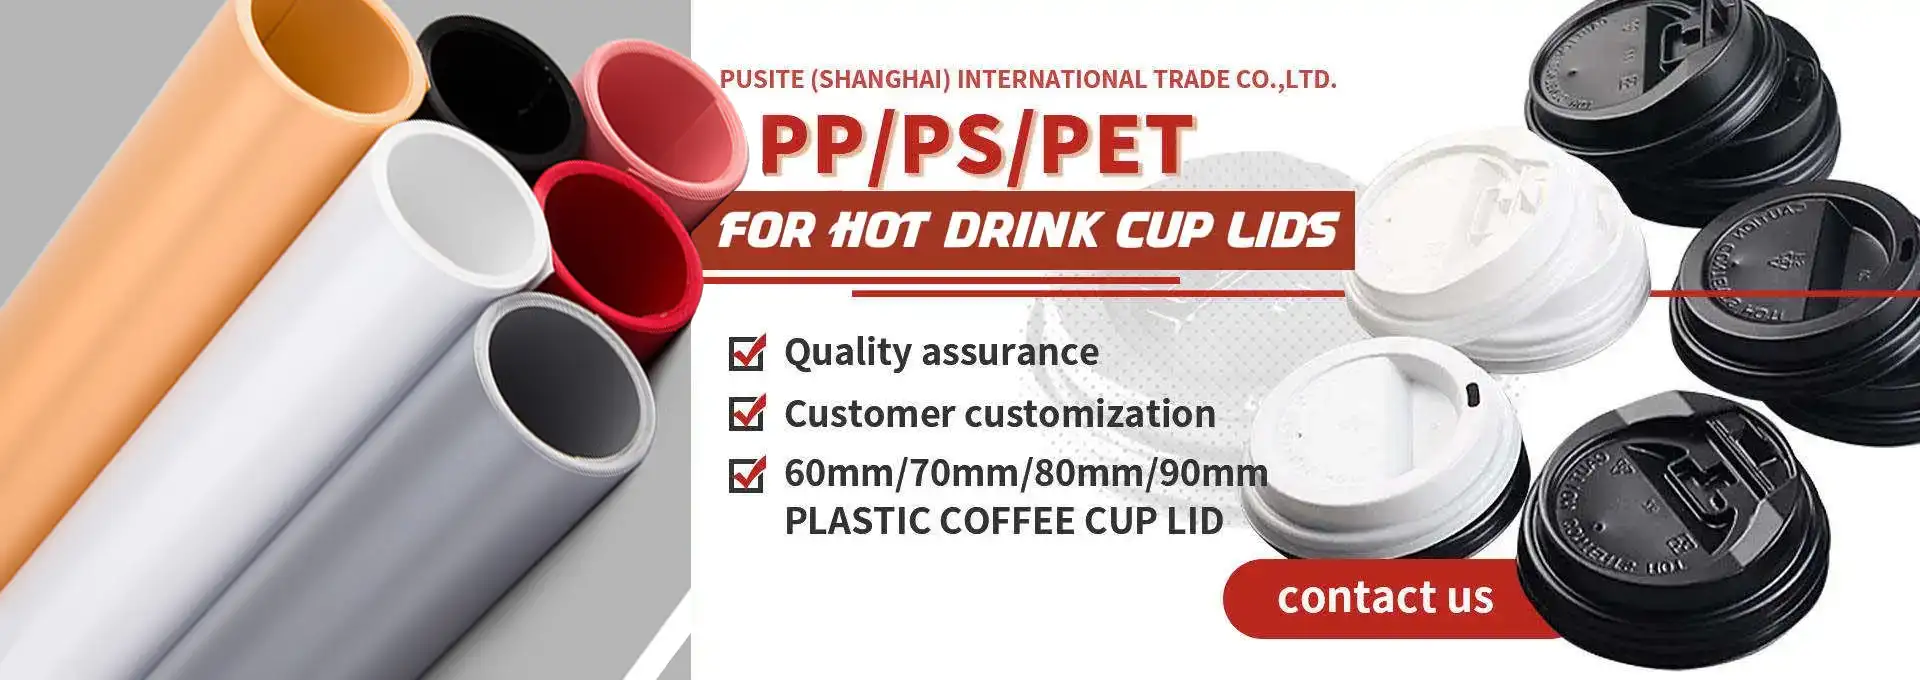 PP PS sheet for kinds of cups and lids